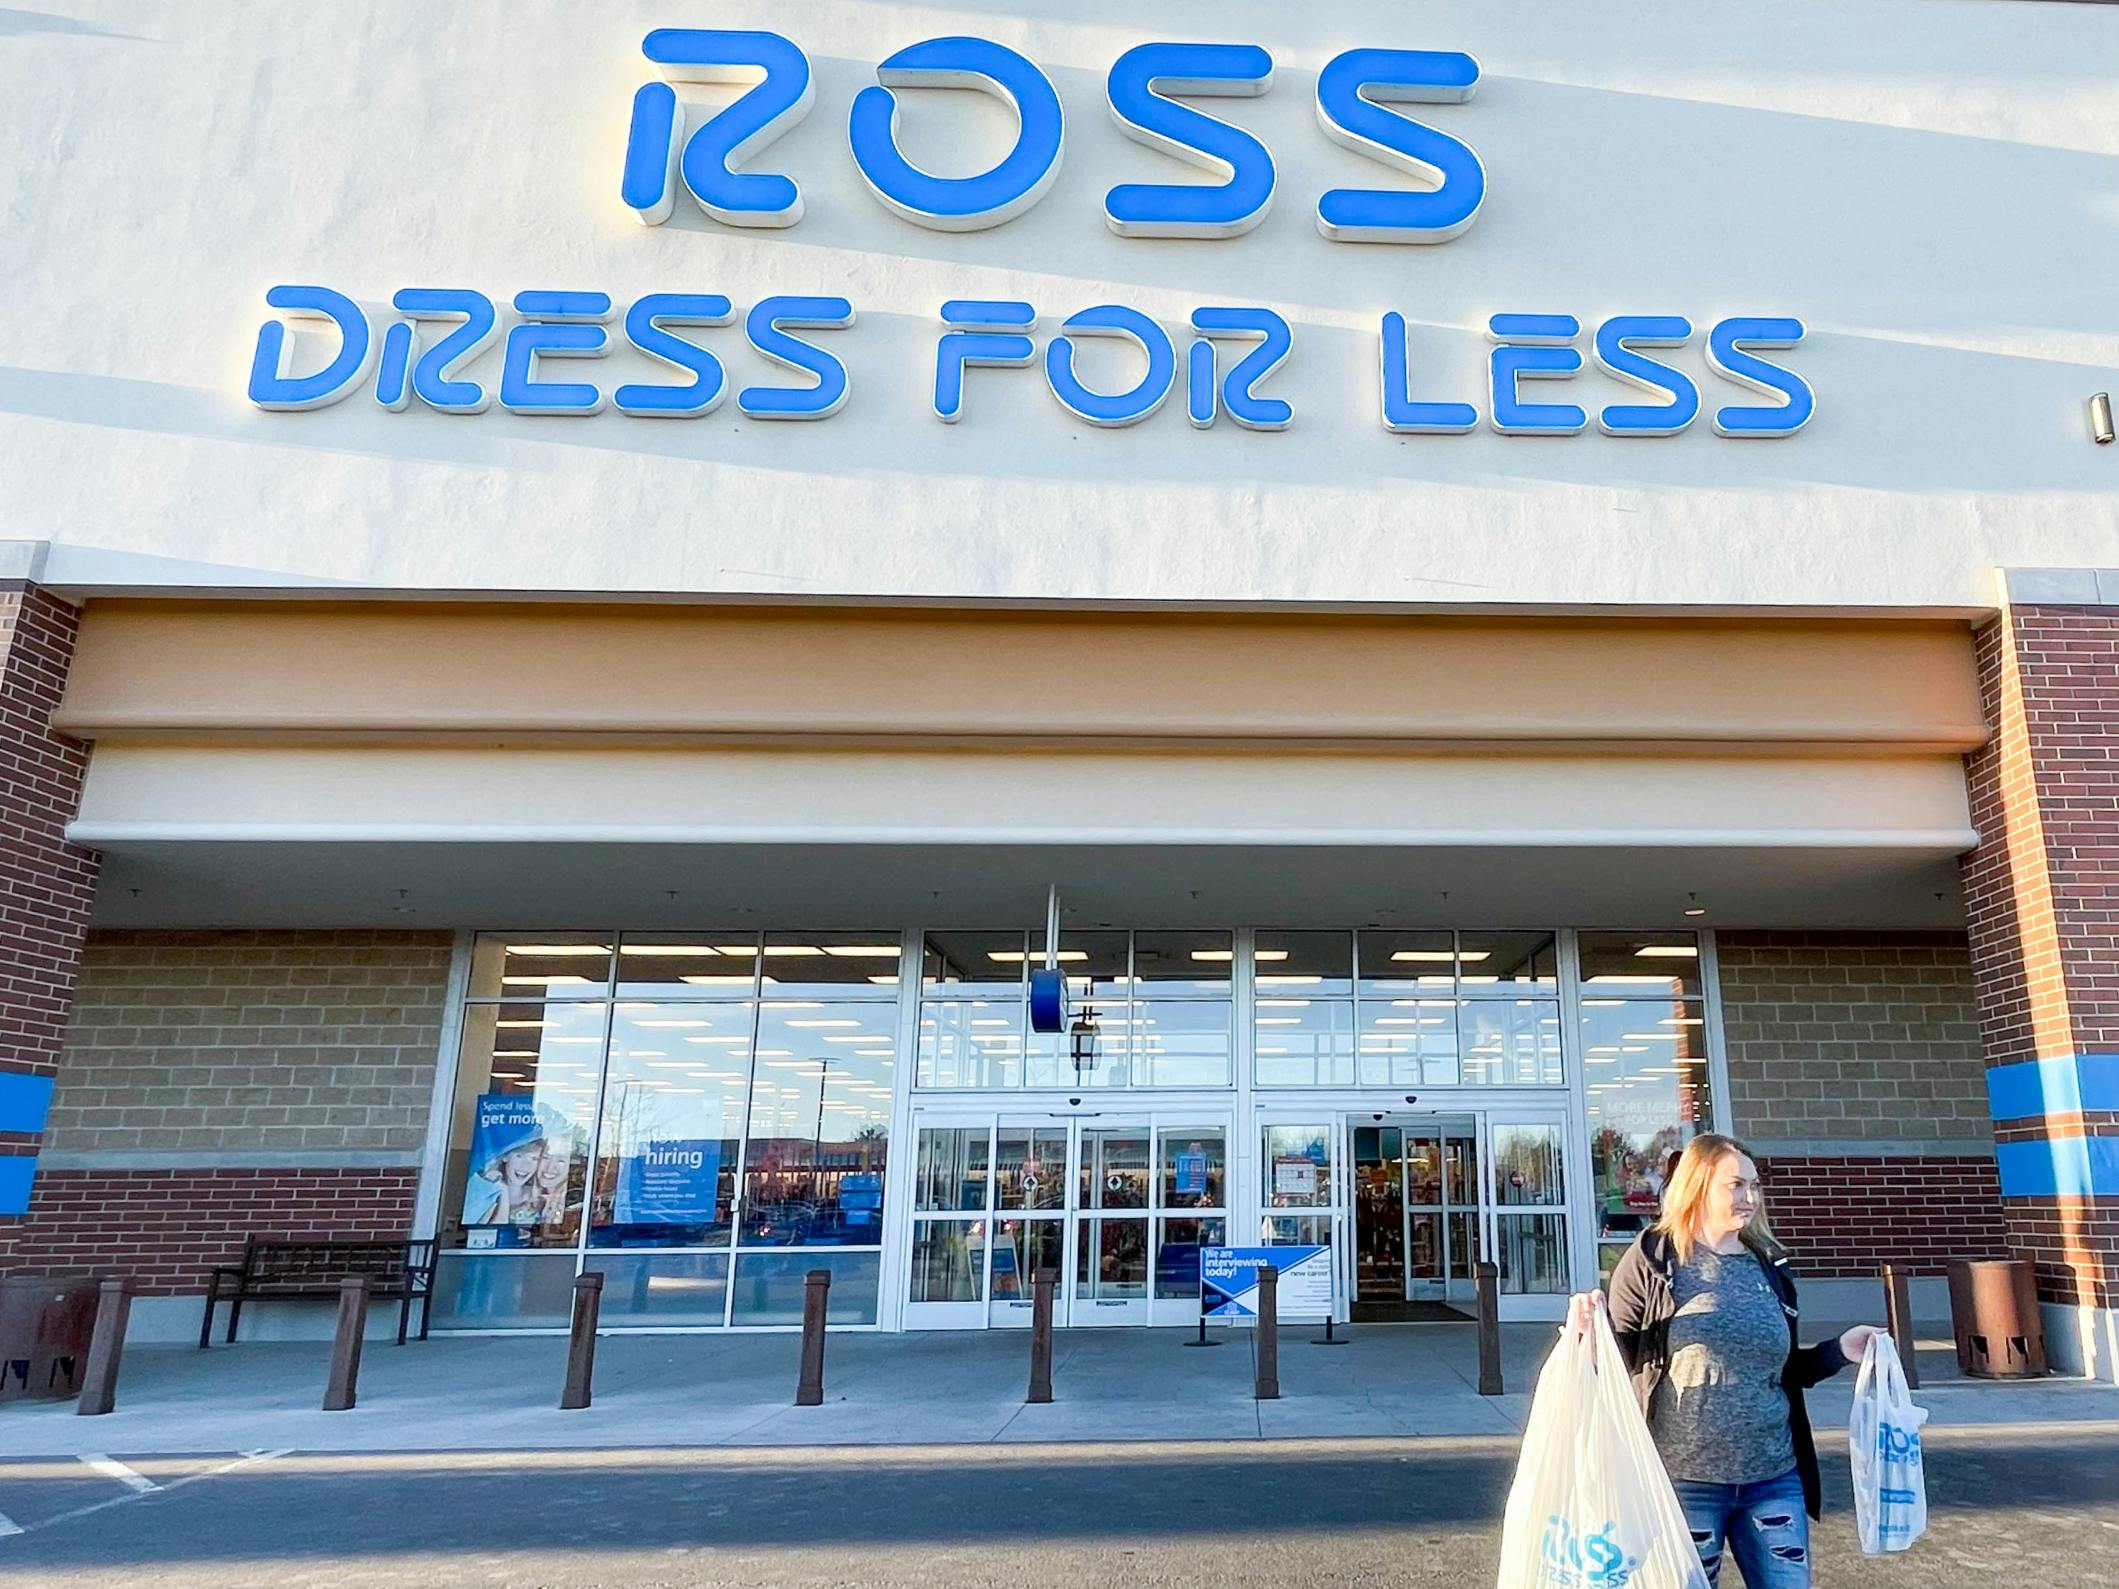 Ross vs. T.J.Maxx: Who Has the Best Deals? - The Krazy Coupon Lady